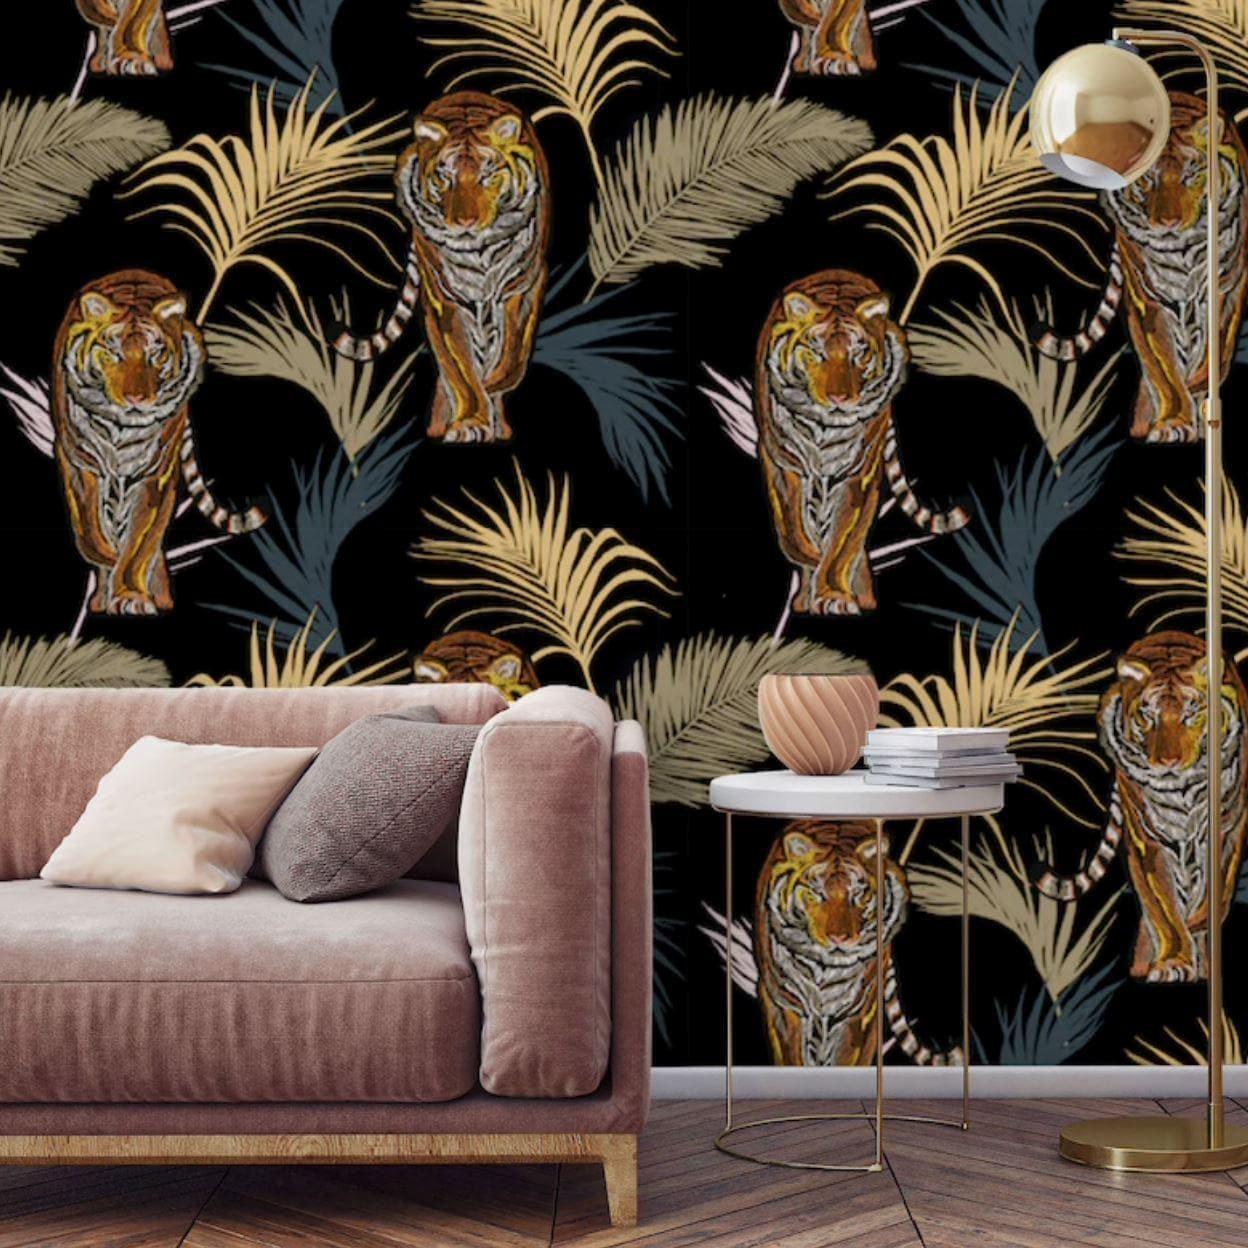 Palm Leaves and Tigers in Jungle Wallpaper - MAIA HOMES